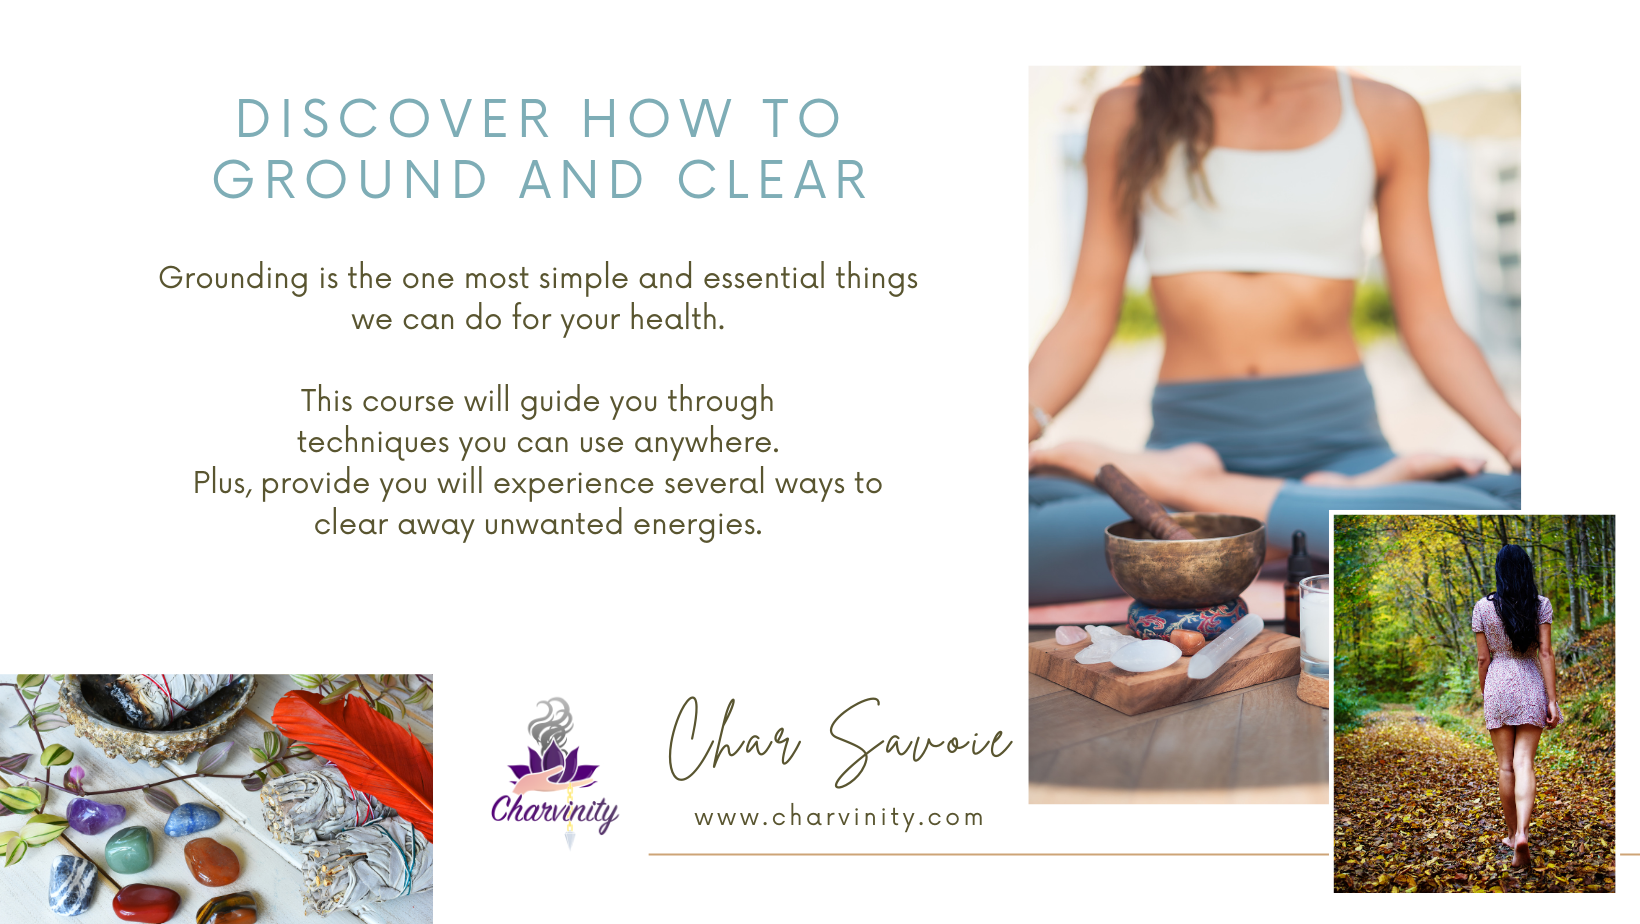 Learn to Ground and Cleanse